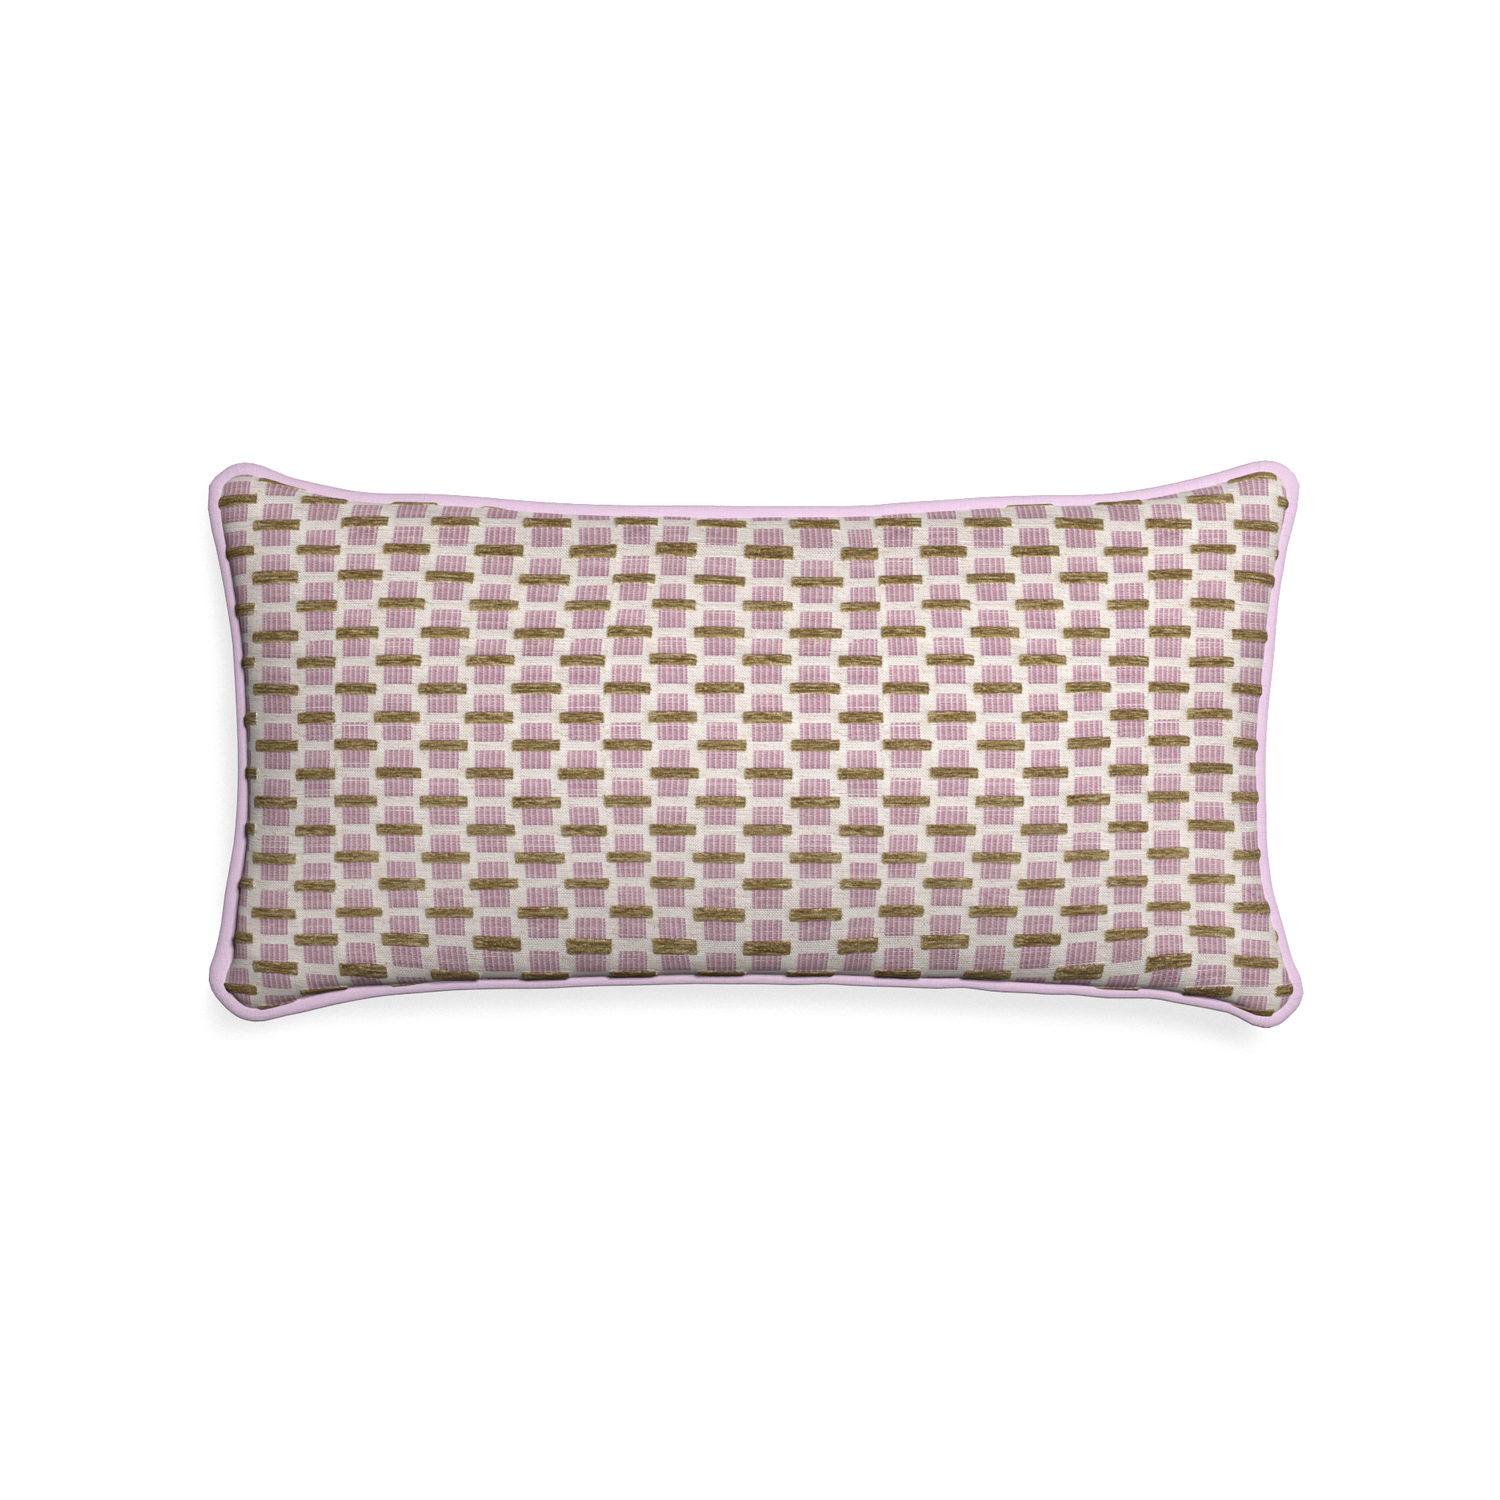 Midi-lumbar willow orchid custom pink geometric chenillepillow with l piping on white background